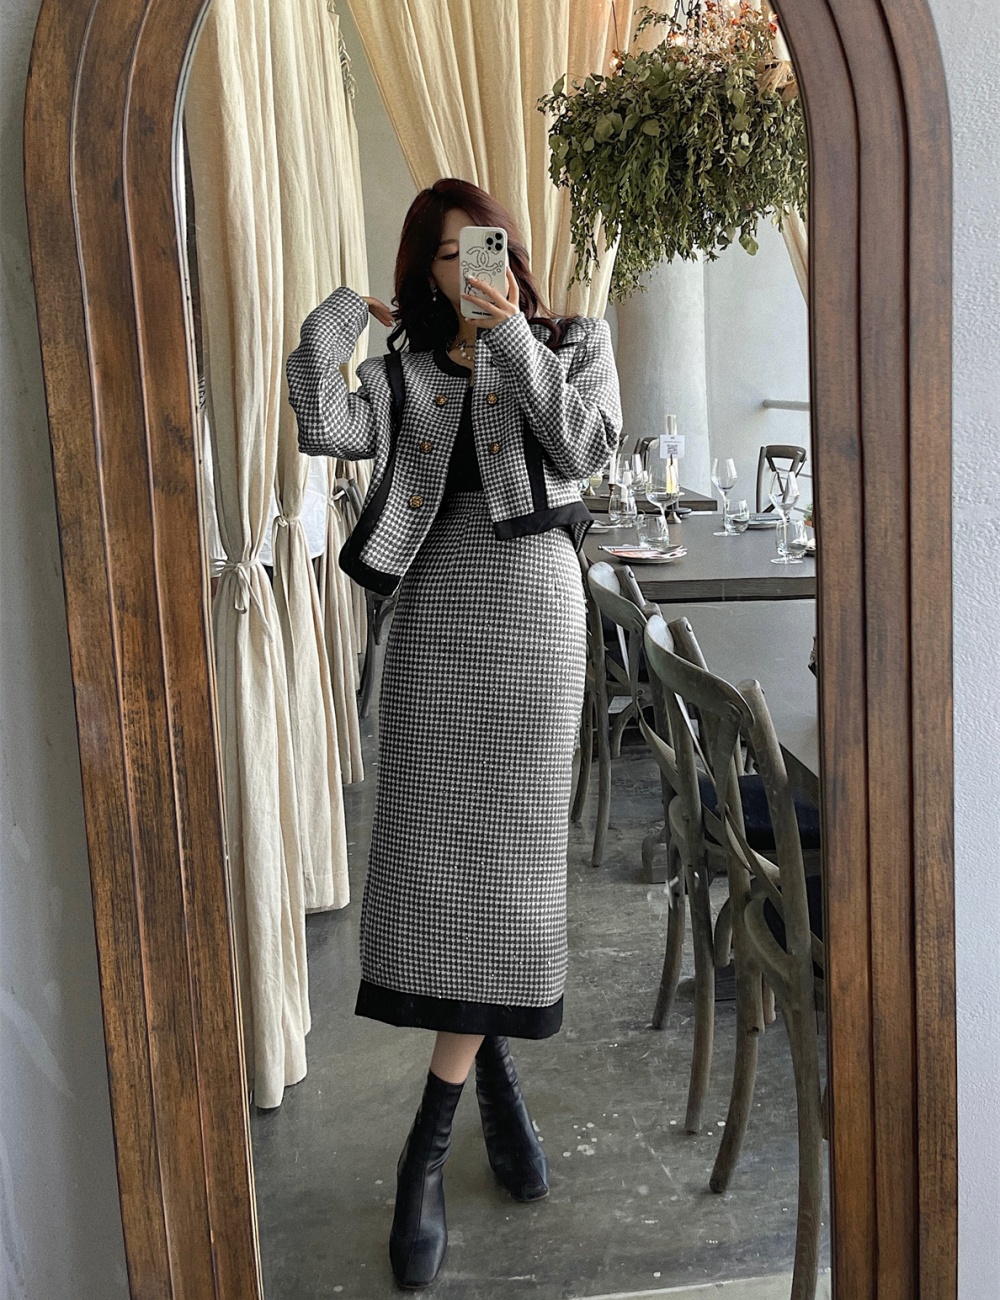 Mixed colors houndstooth jacket chanelstyle skirt a set